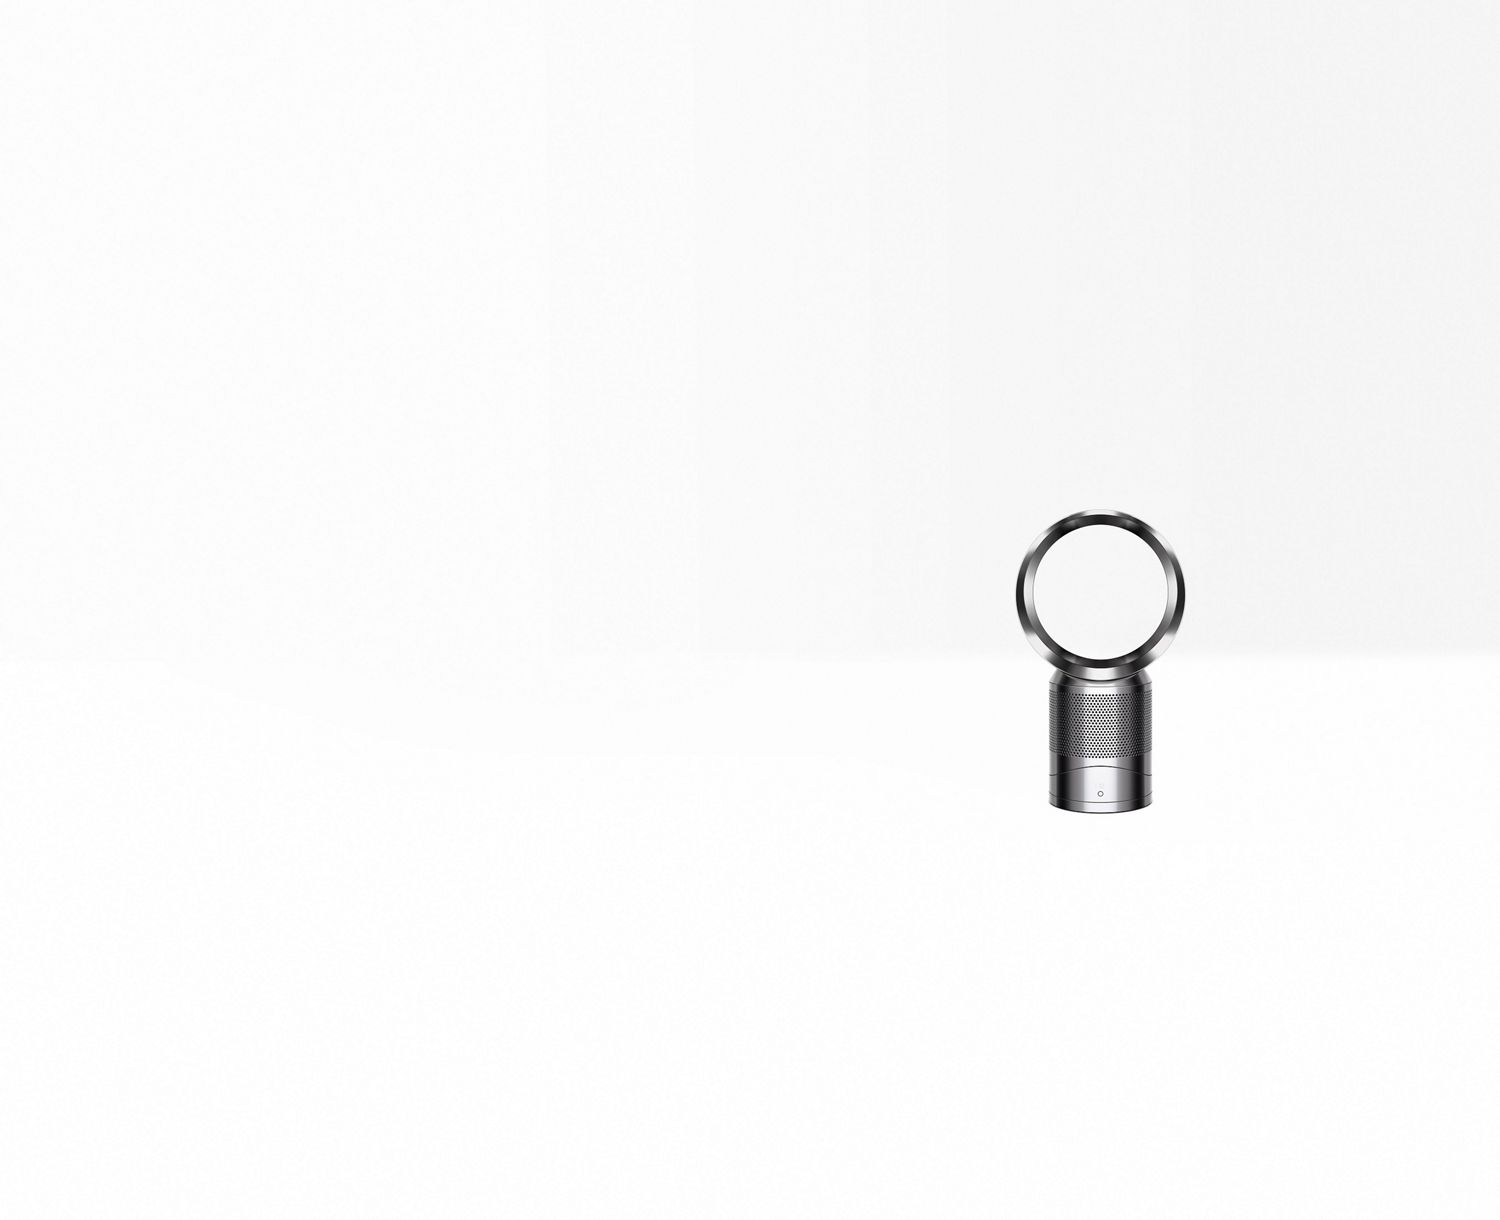 dyson pure cool link nickel